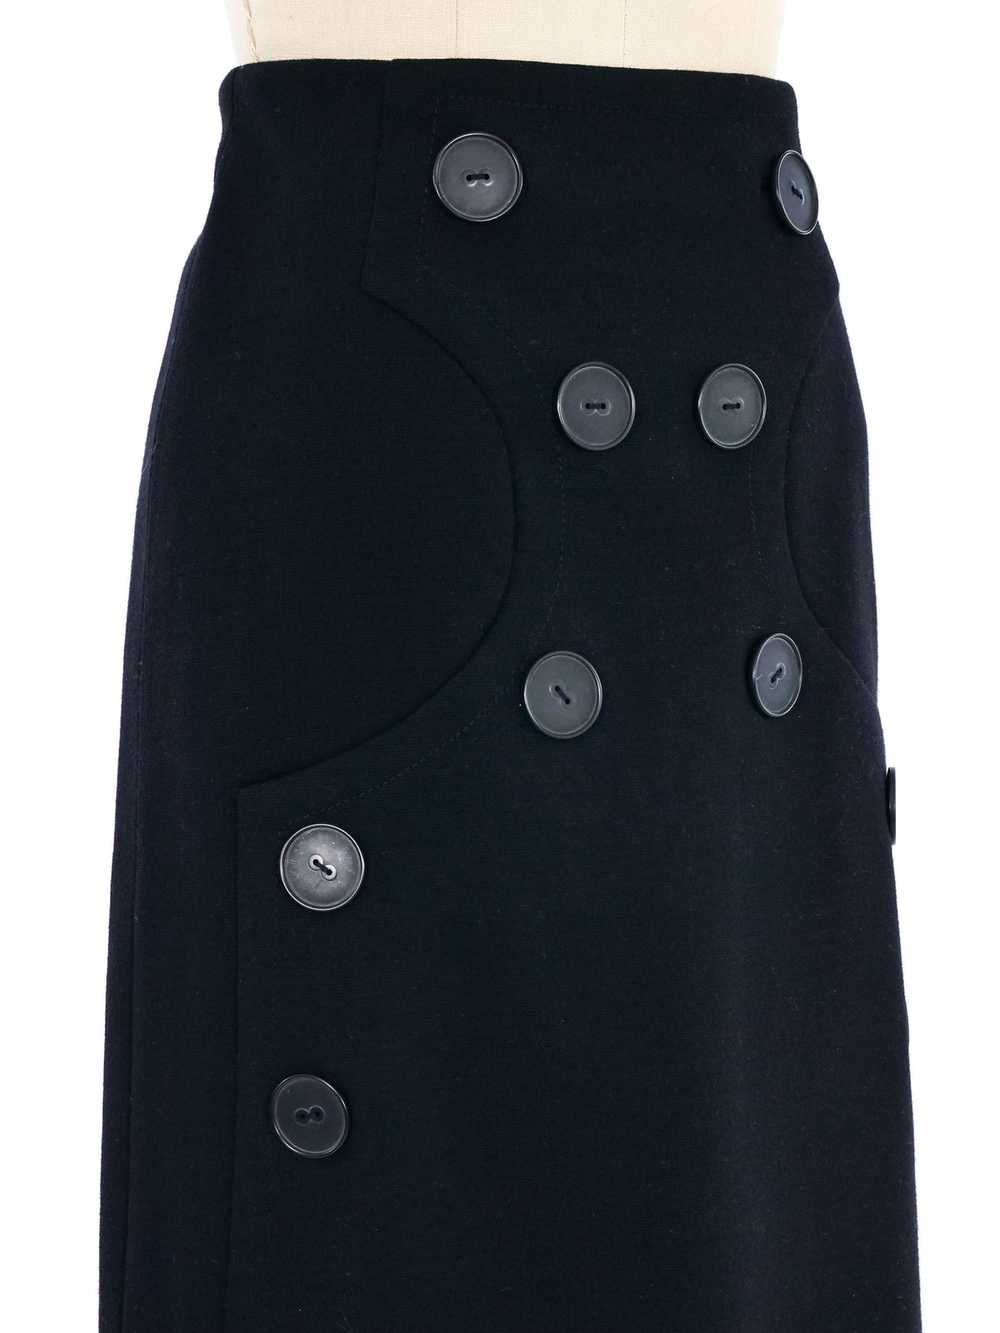 2005 Christian Dior Haute Couture Button Skirt - image 4